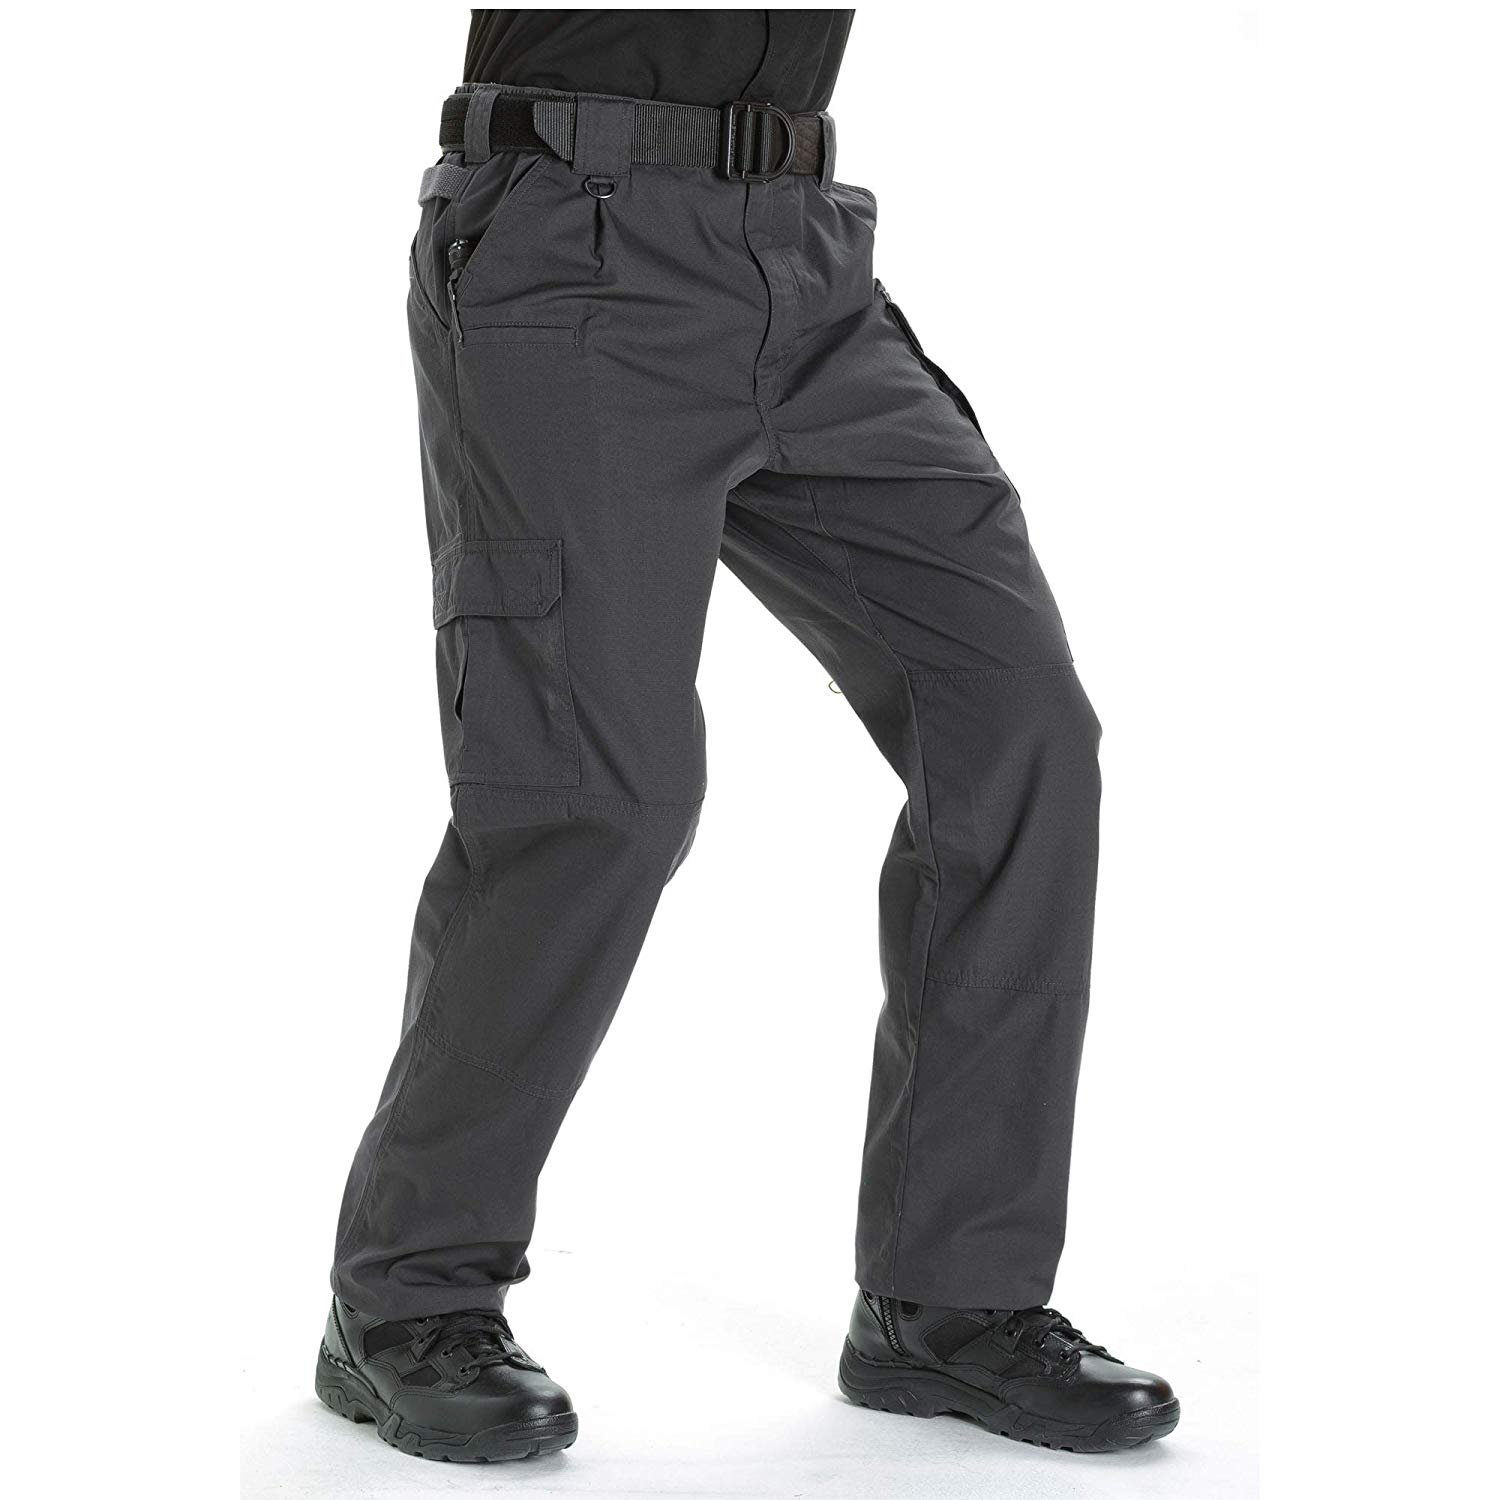  5.11 Tactical Men's Taclite Pro Lightweight Performance Pants,  Cargo Pockets, Action Waistband, Battle Brown, 28W x 30L, Style 74273 :  Clothing, Shoes & Jewelry